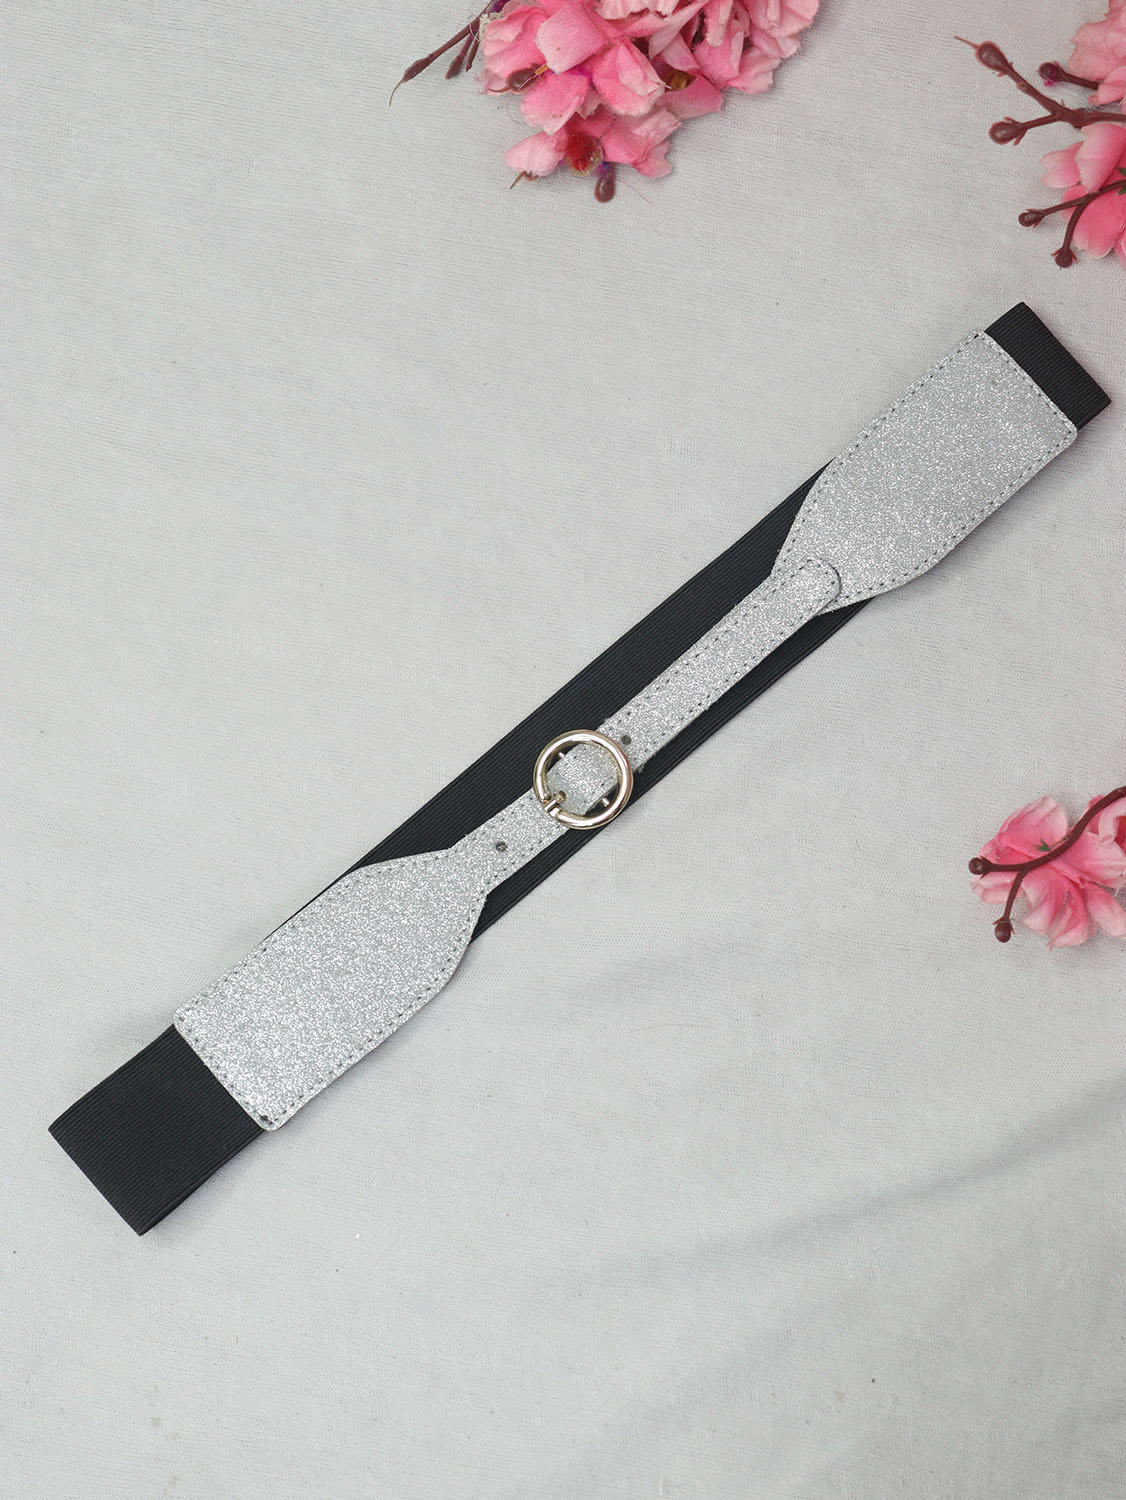 Stylish Silver and Black Elastic Belt for Comfortable Fit - Luxurion World